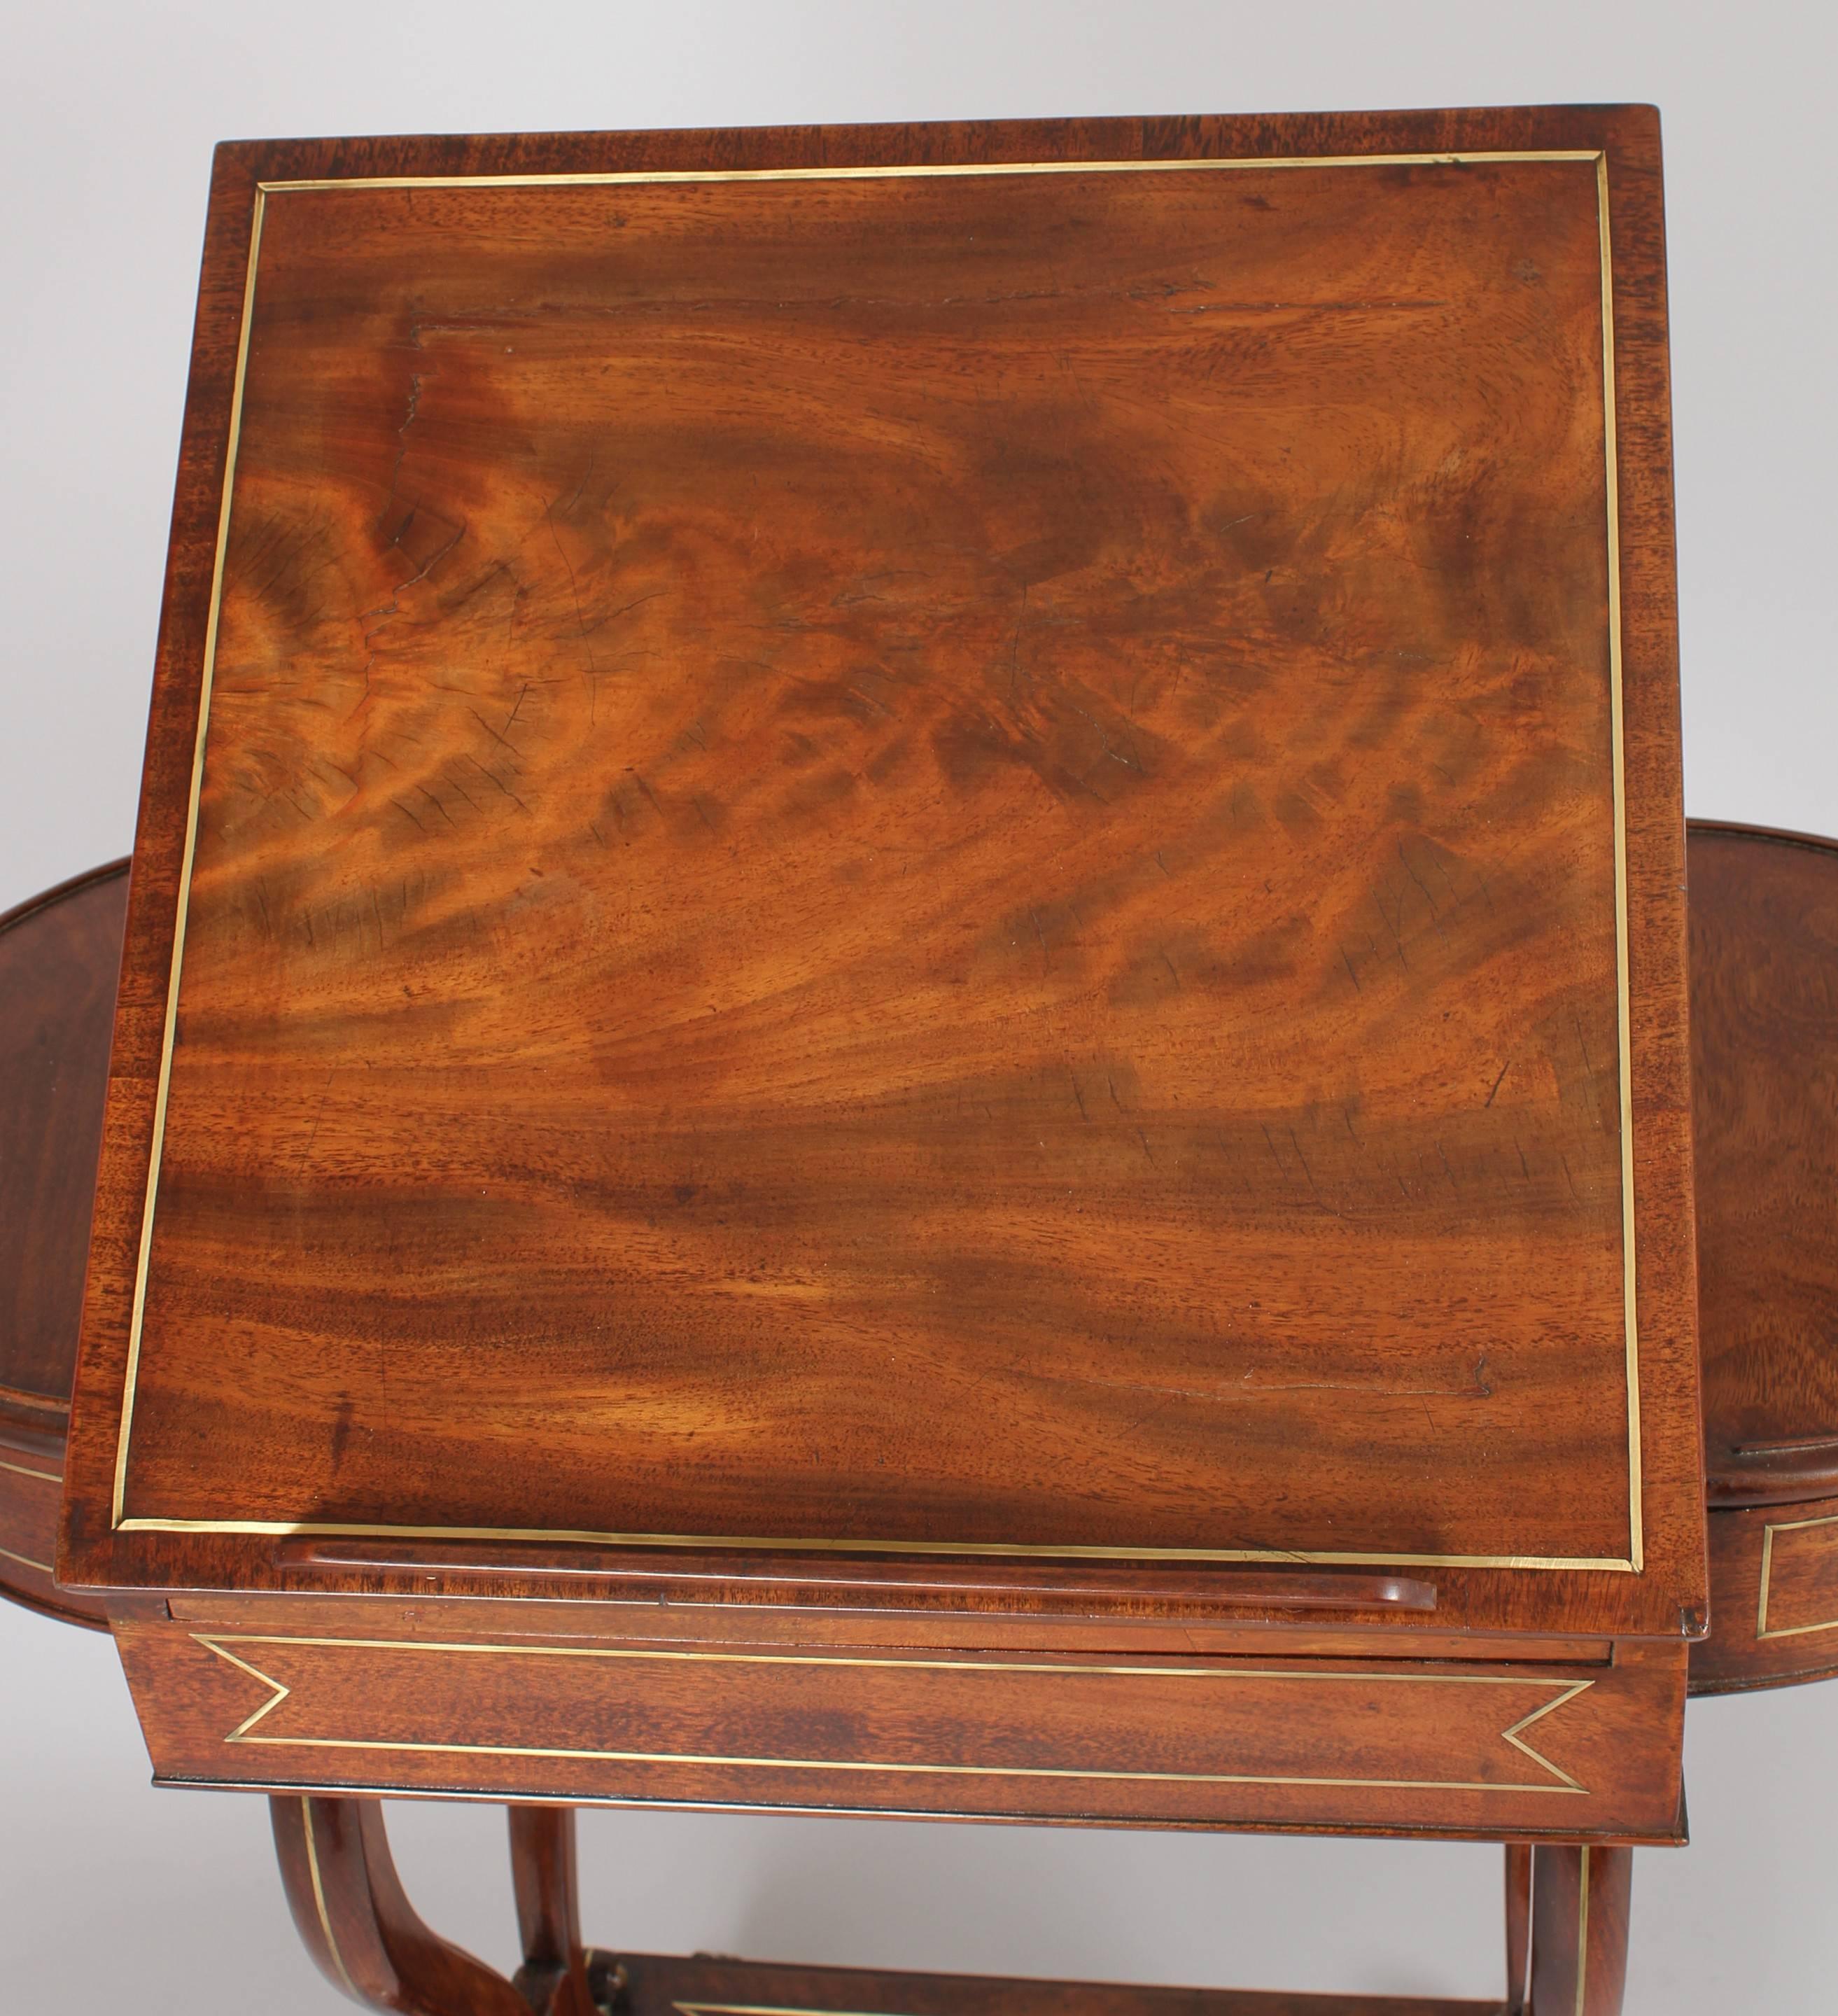 English Regency Mahogany and Brass Inlaid Work-Table